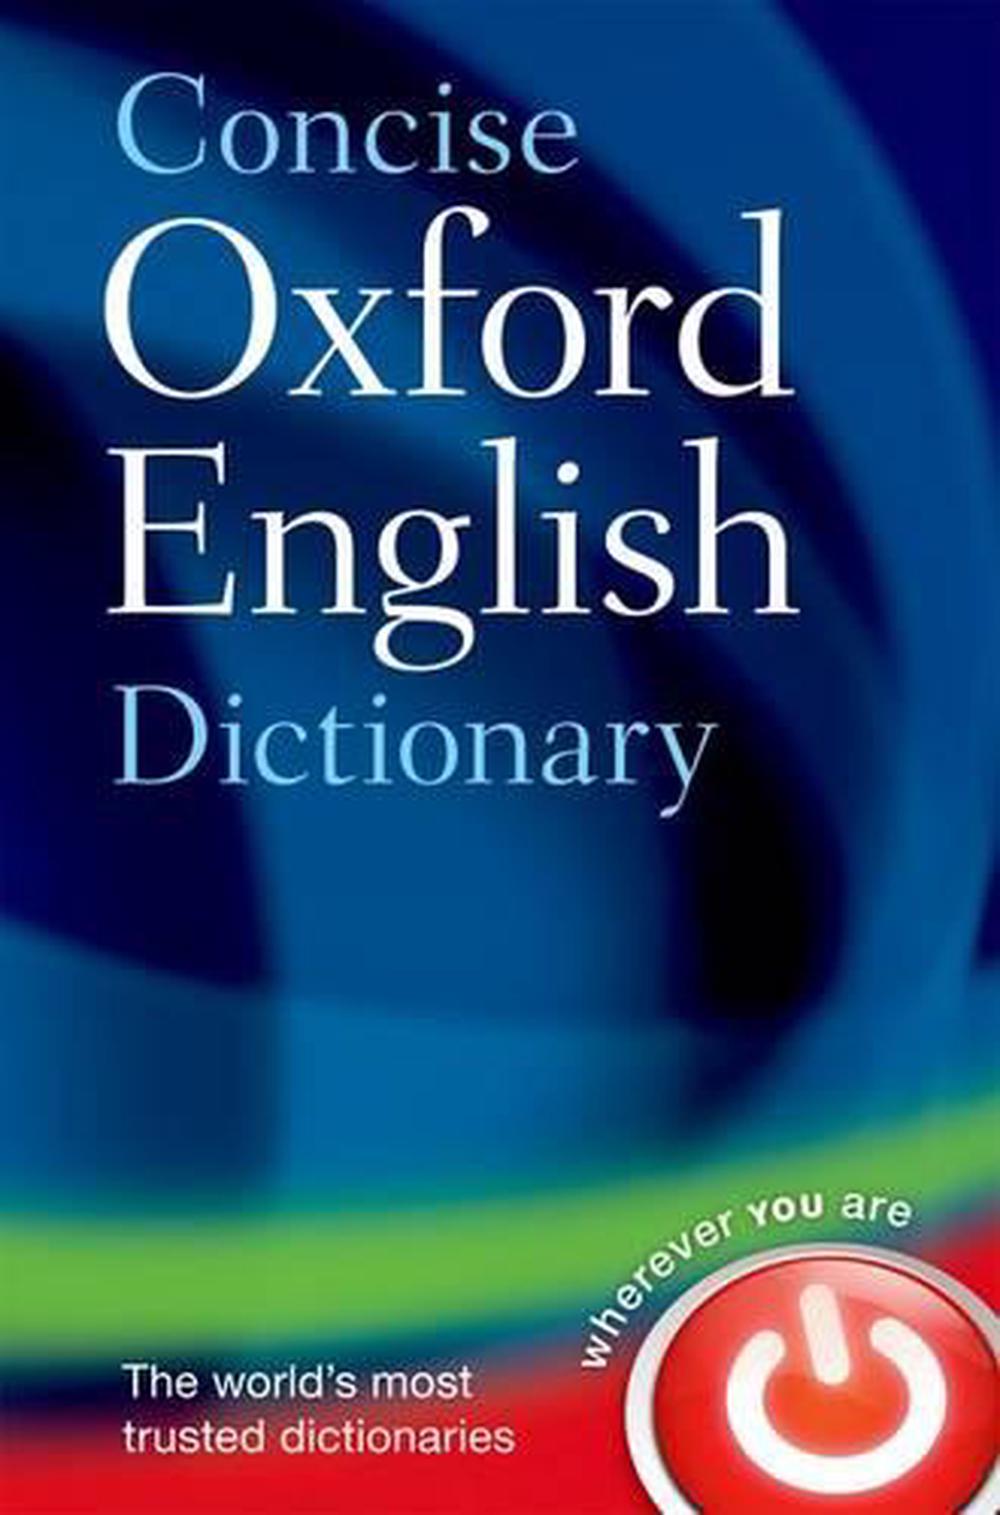 Concise Oxford English Dictionary v13 Edition